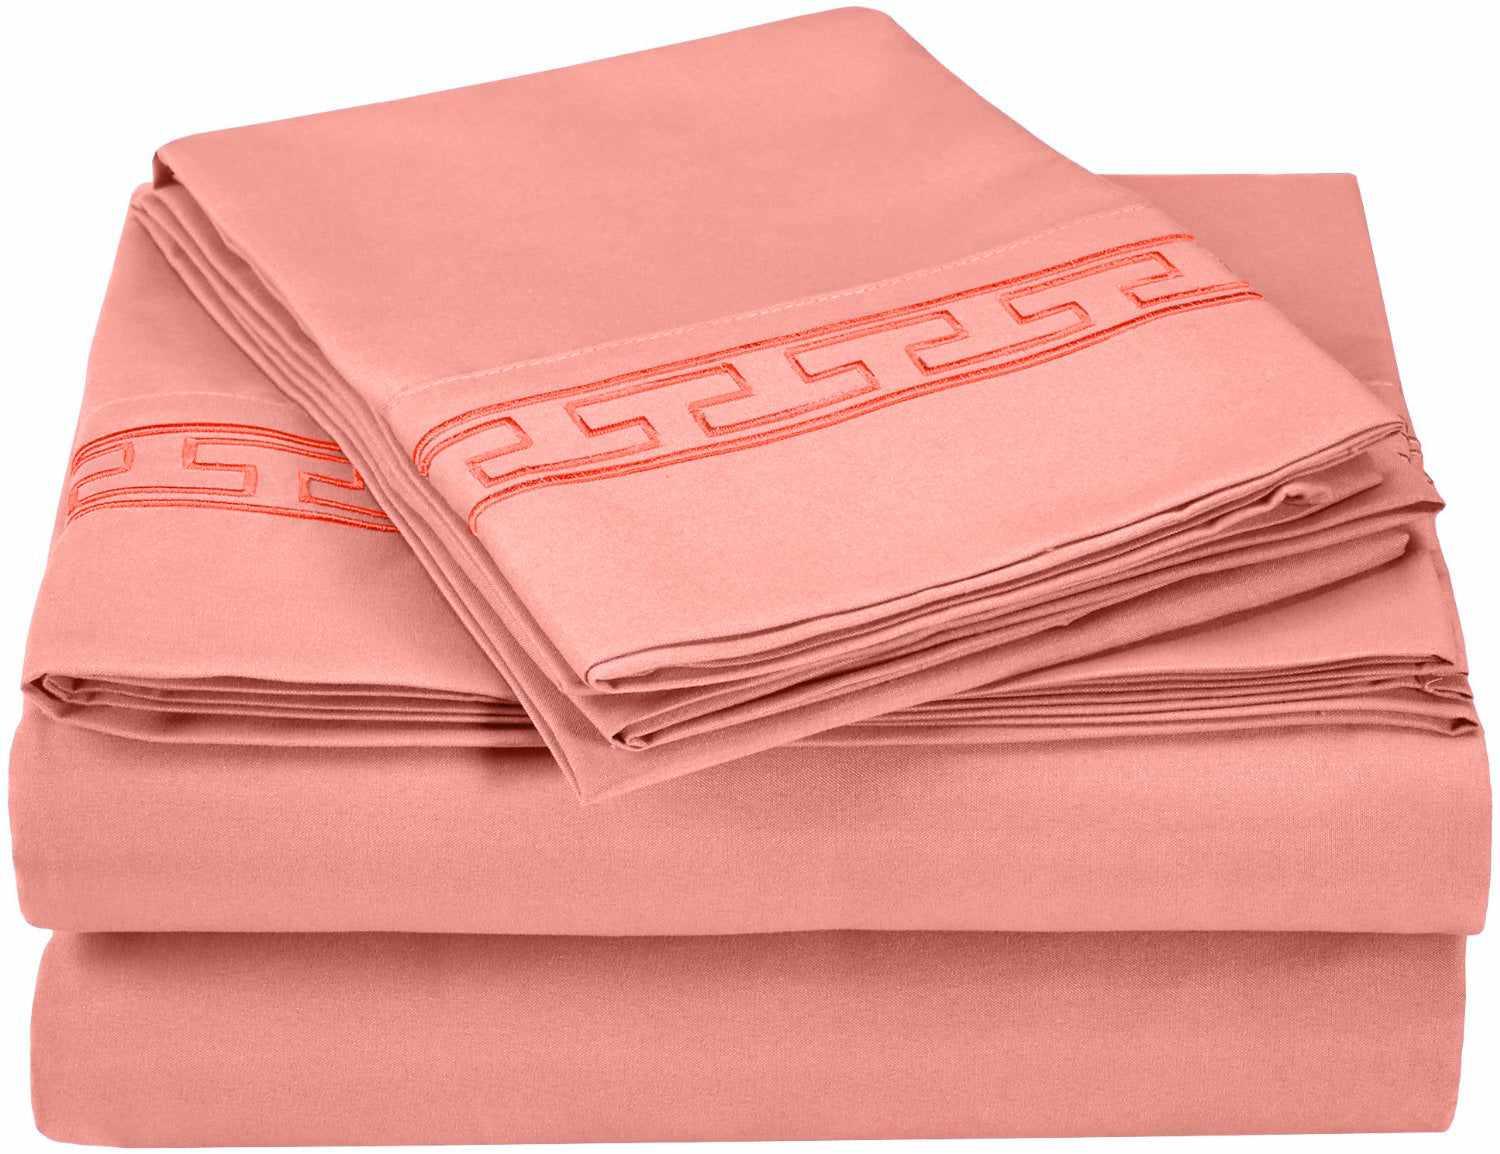  Superior Executive 3000 Series Solid Regal Embroidery Durable Soft Wrinkle Free Sheet Set -  Coral